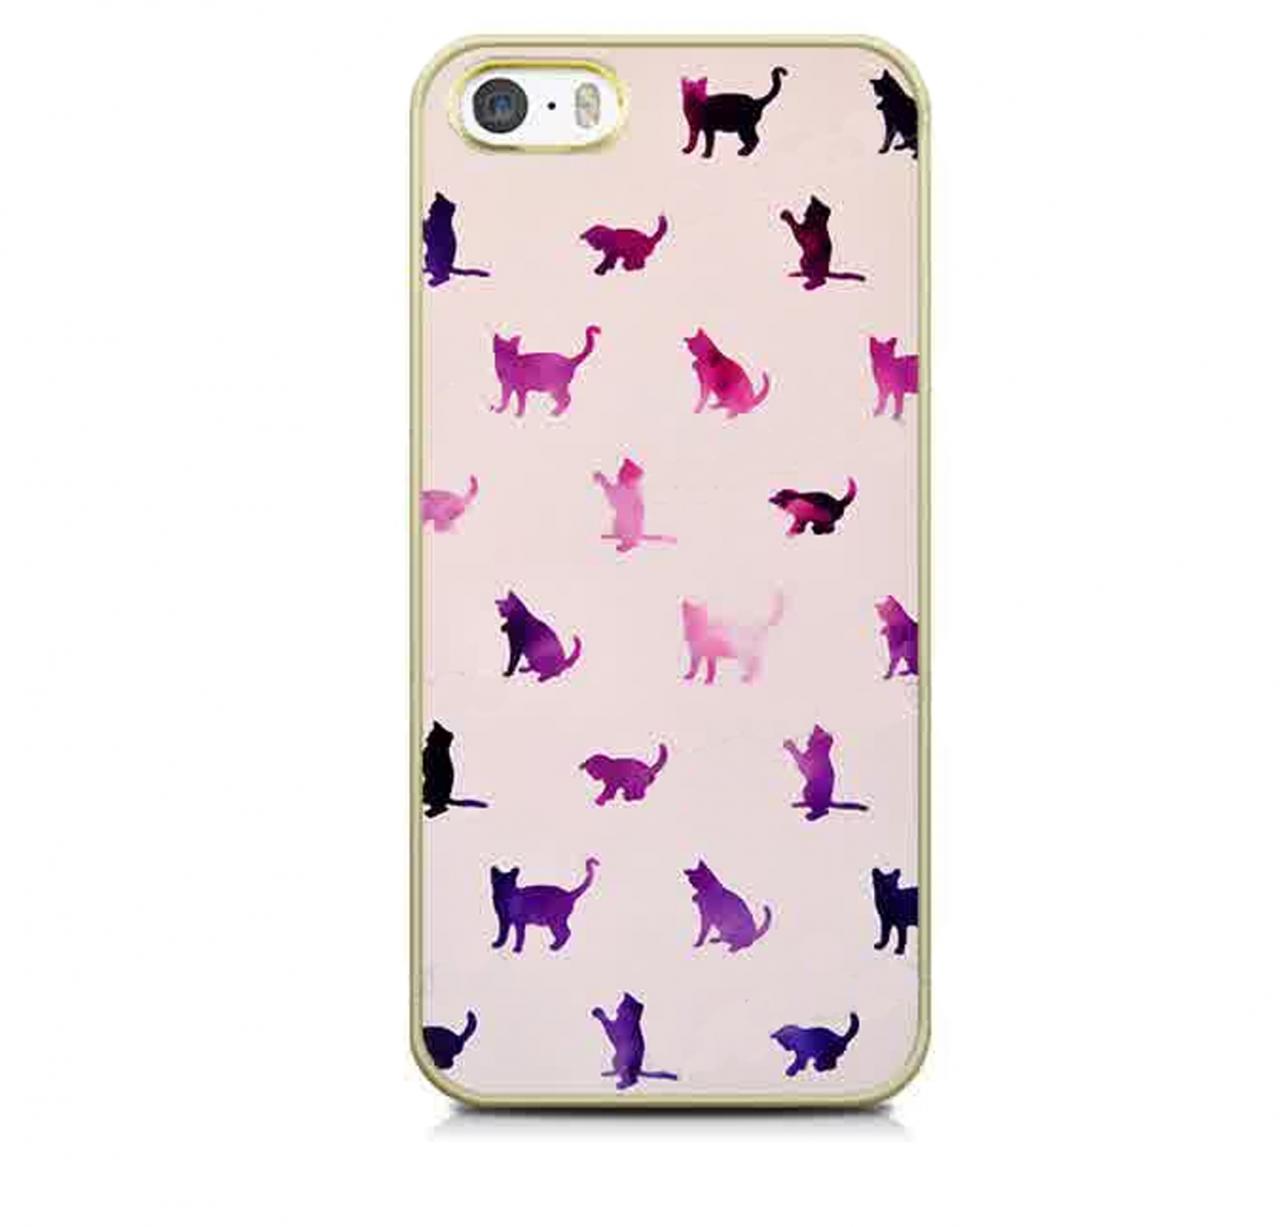 Cute Cat Galaxy Pattern Protective Case For Iphone And Samsung Galaxy ( Screen Protector)